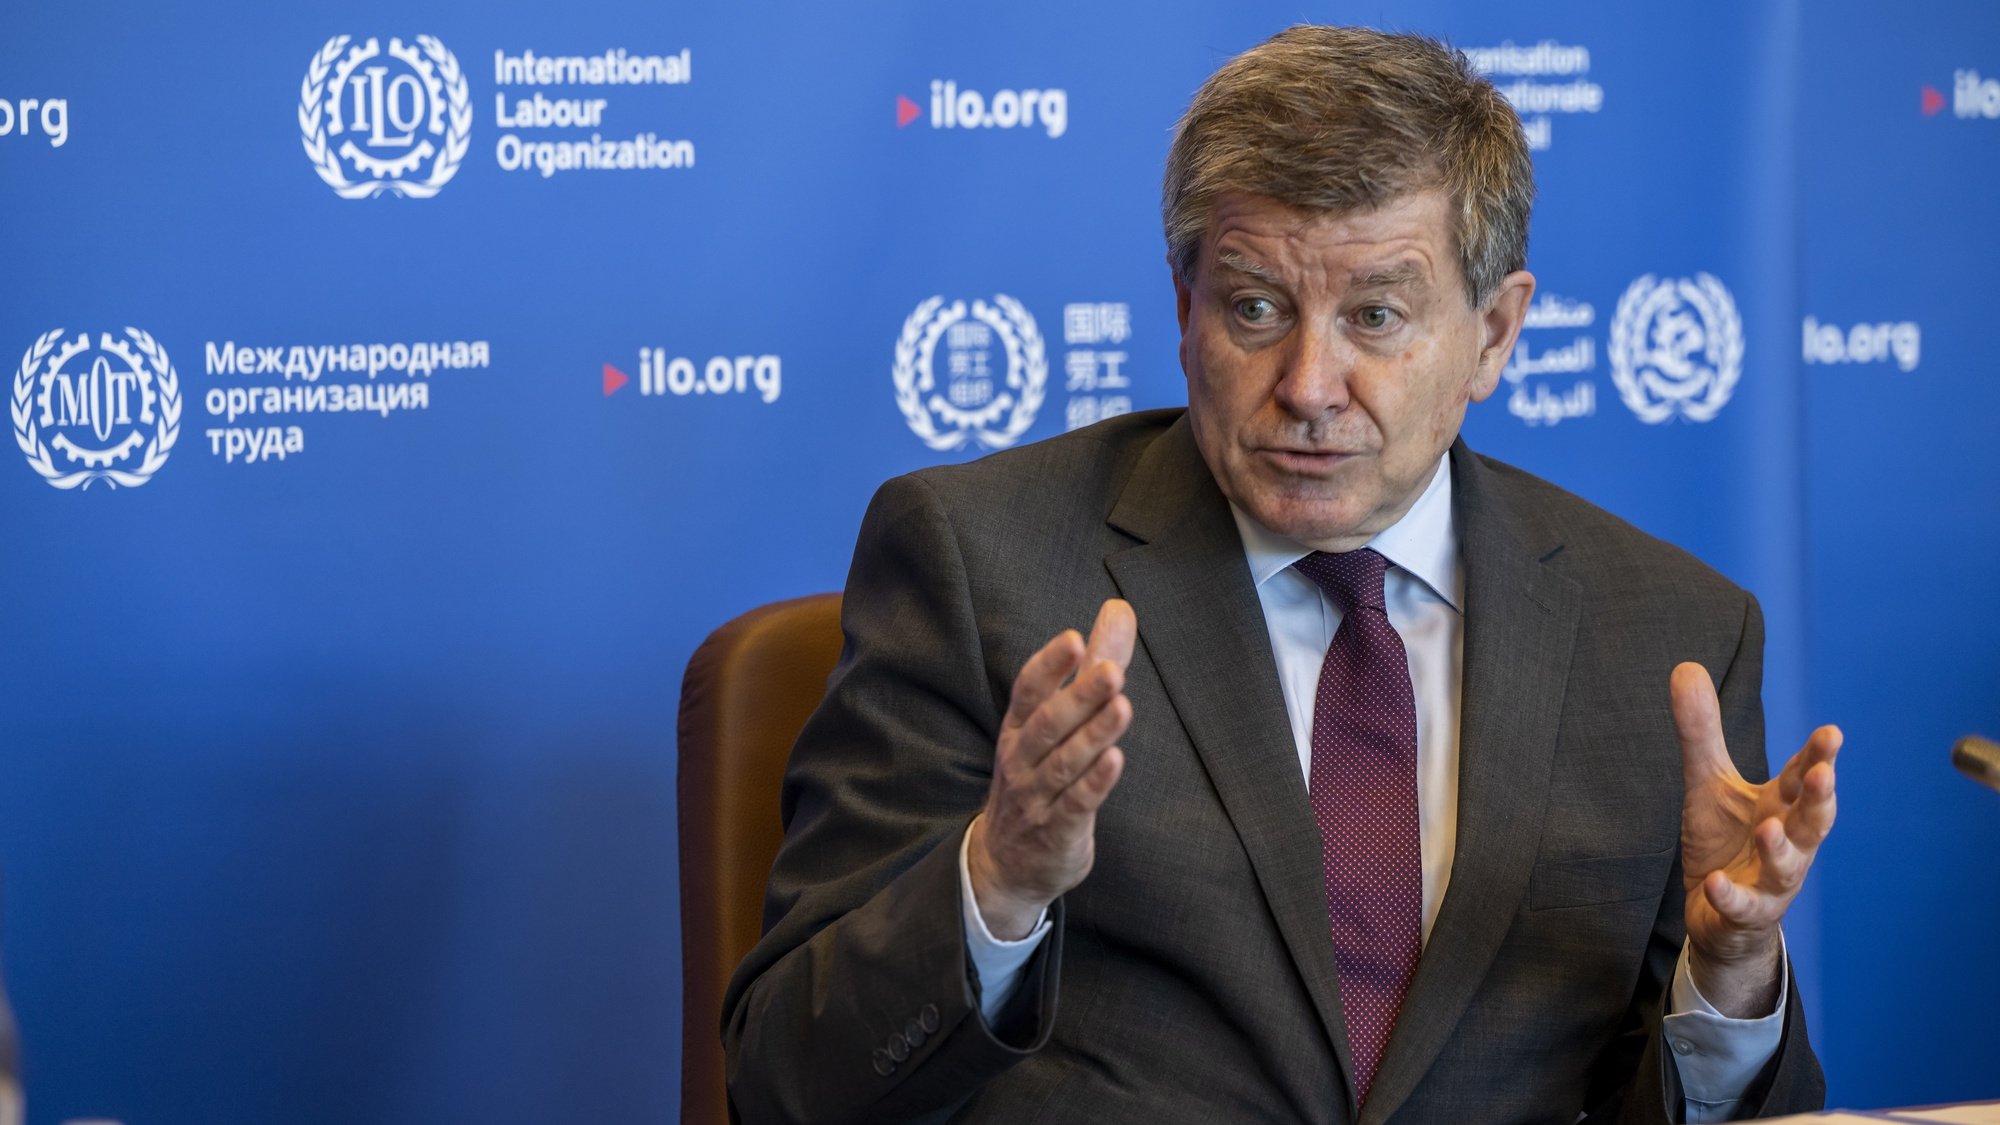 epa09974956 General Director of the International Labour Organisation, ILO, Guy Ryder speaks during meetings and discussions with Minister of Labor and Social Economy of Spain Yolanda Diaz at the headquarters of the Intermational Labour Organisation, (OIT ILO BIT), in Geneva, Switzerland, 25 May 2022. The meetings were about two subjects inclusion of lesbian, gay, bisexual, transgender, intersex and queer (LGBTIQ+) persons in the World of Work, lauch of a learning guide and Ceremony, deposit of the instruments of ratification of conventions (home work convention, 1996) and Violence and harassment convention, 2019 by the Government of Spain.  EPA/MARTIAL TREZZINI